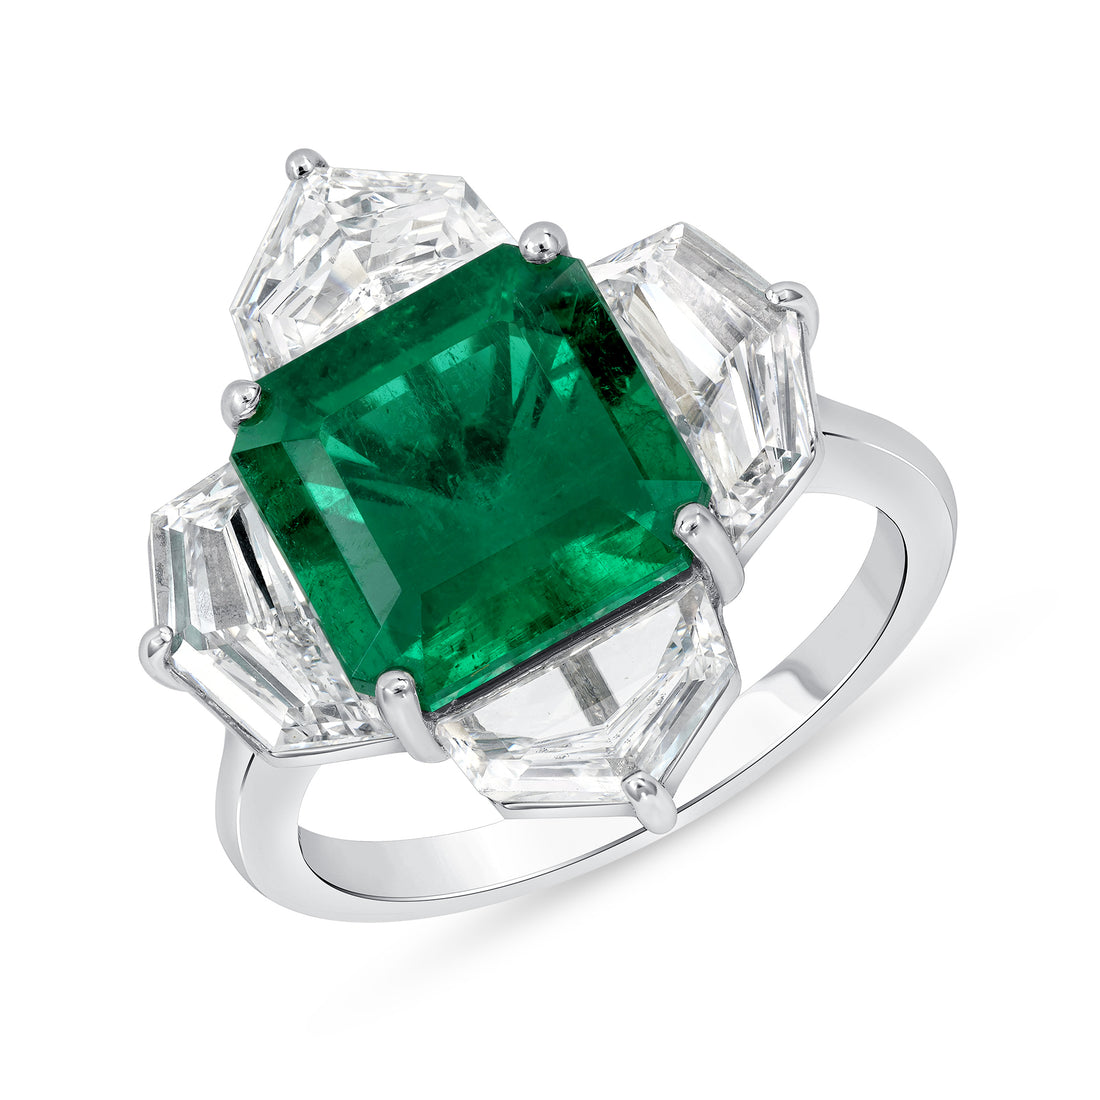 Emerald Cut Colombian Emerald and Four Cadillac Diamonds Ring